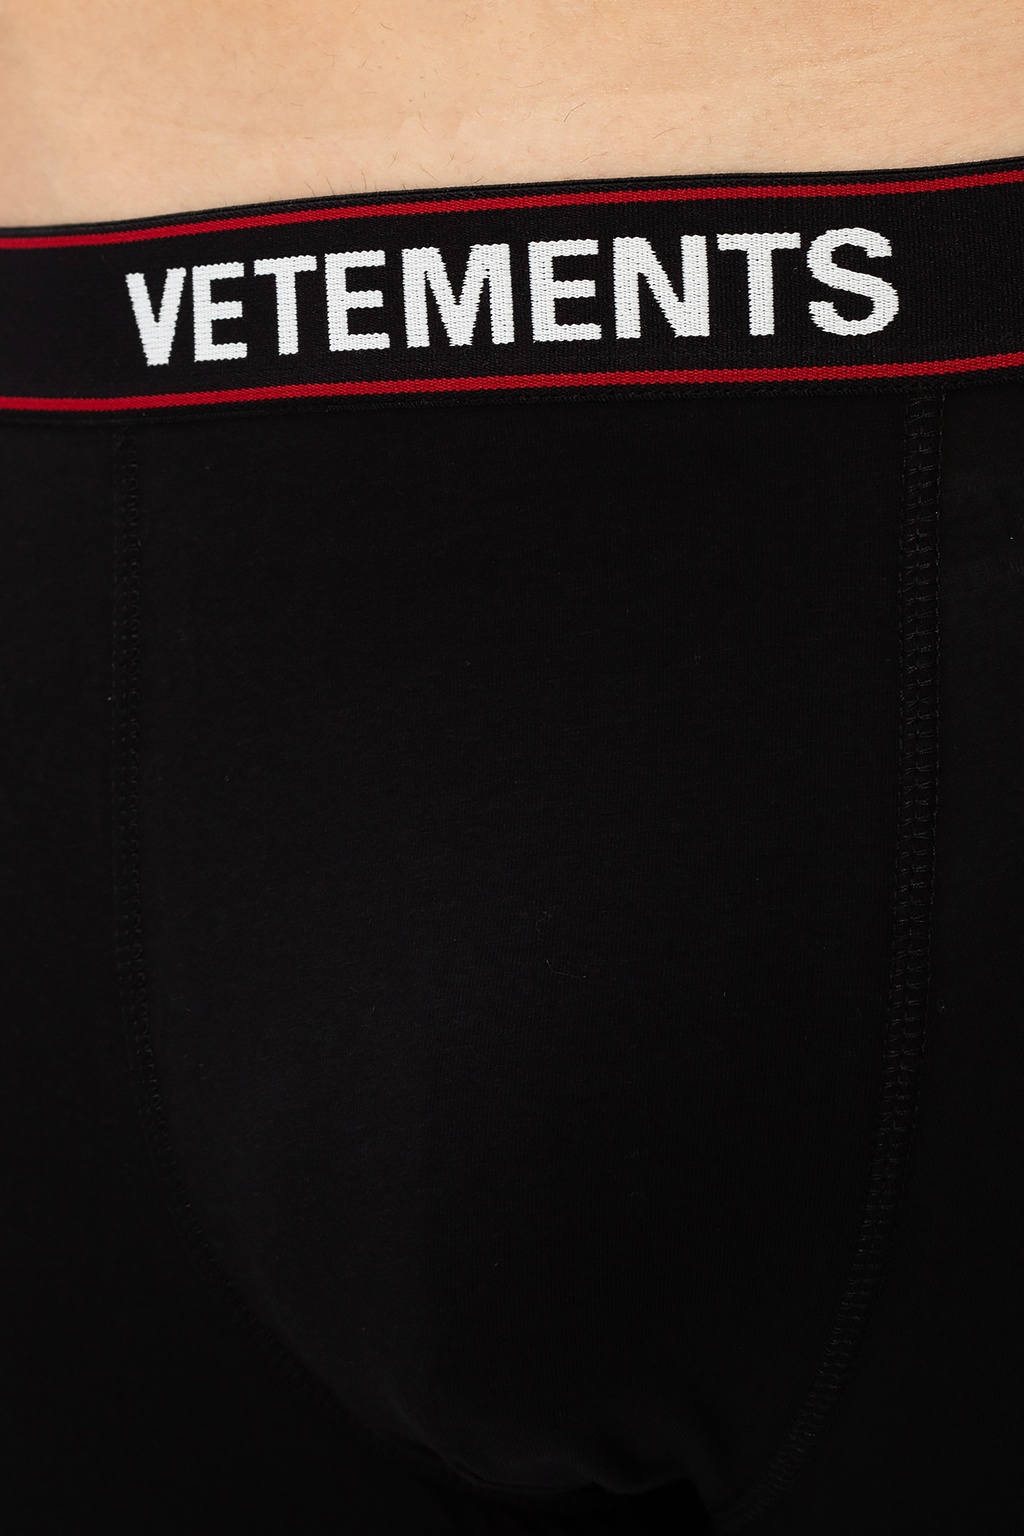 VETEMENTS Boxers with logo, Men's Clothing